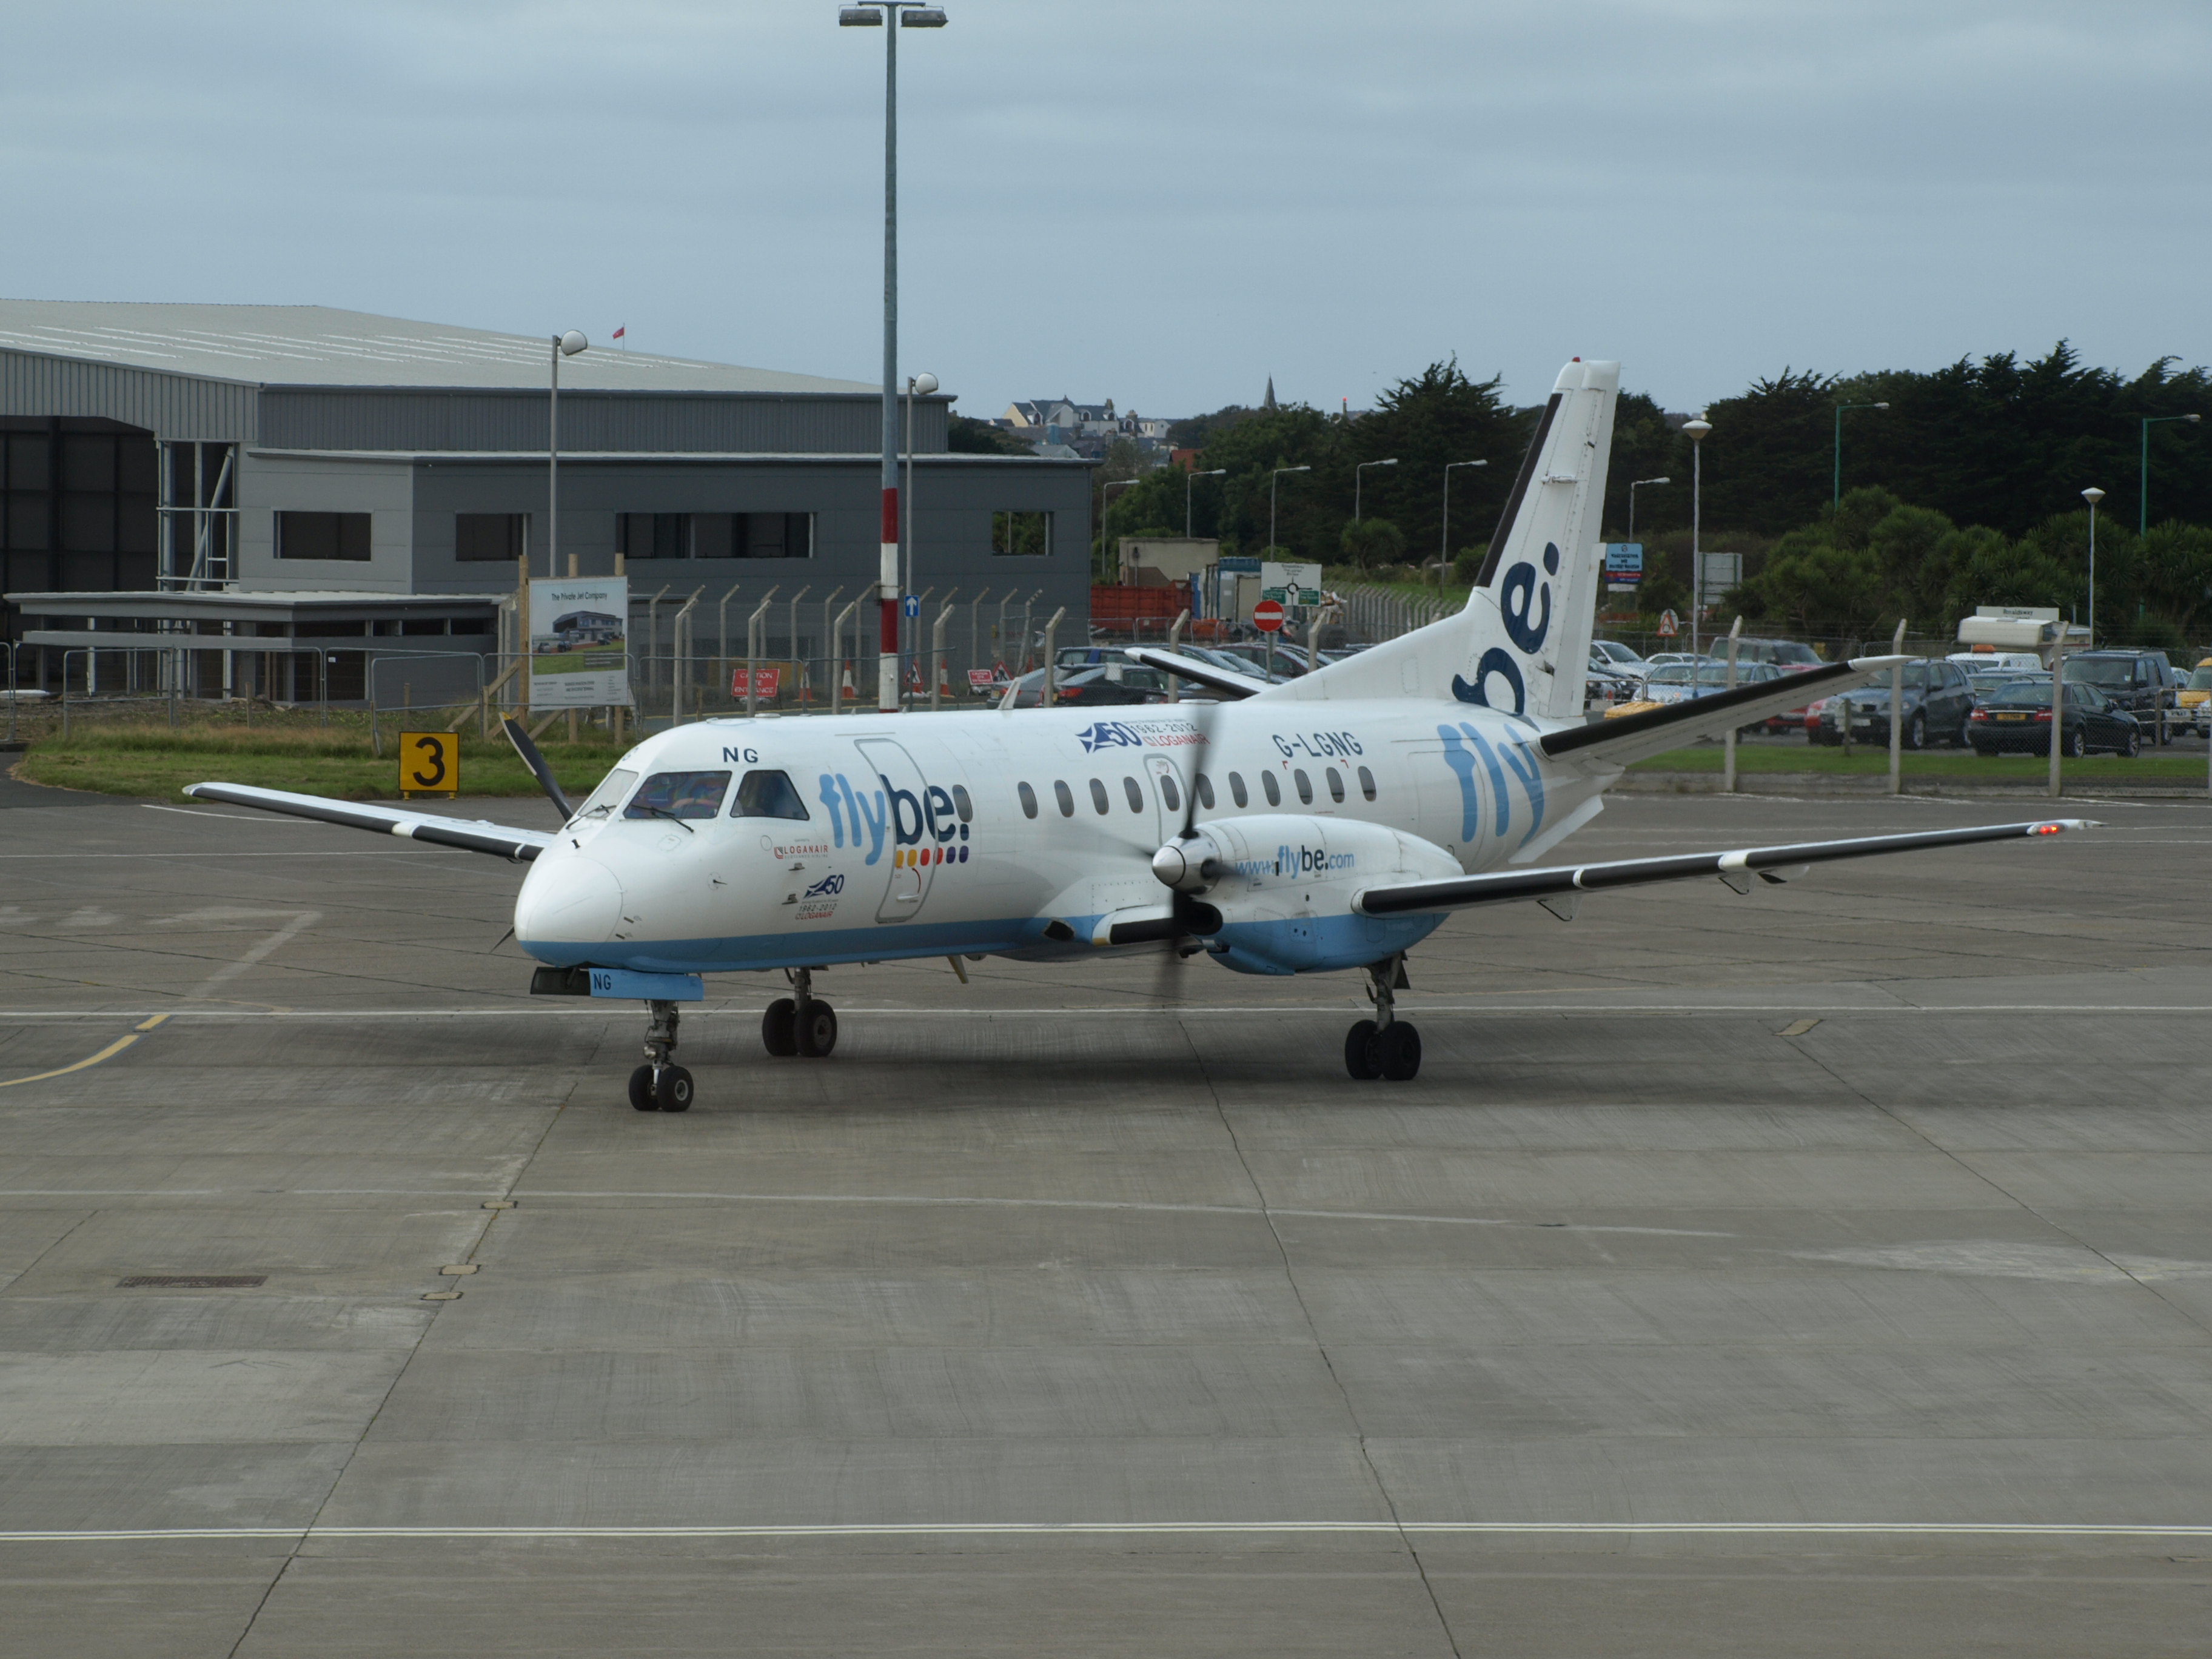 Flybe G-LGNG at Ronaldsway Airport, Isle of Man